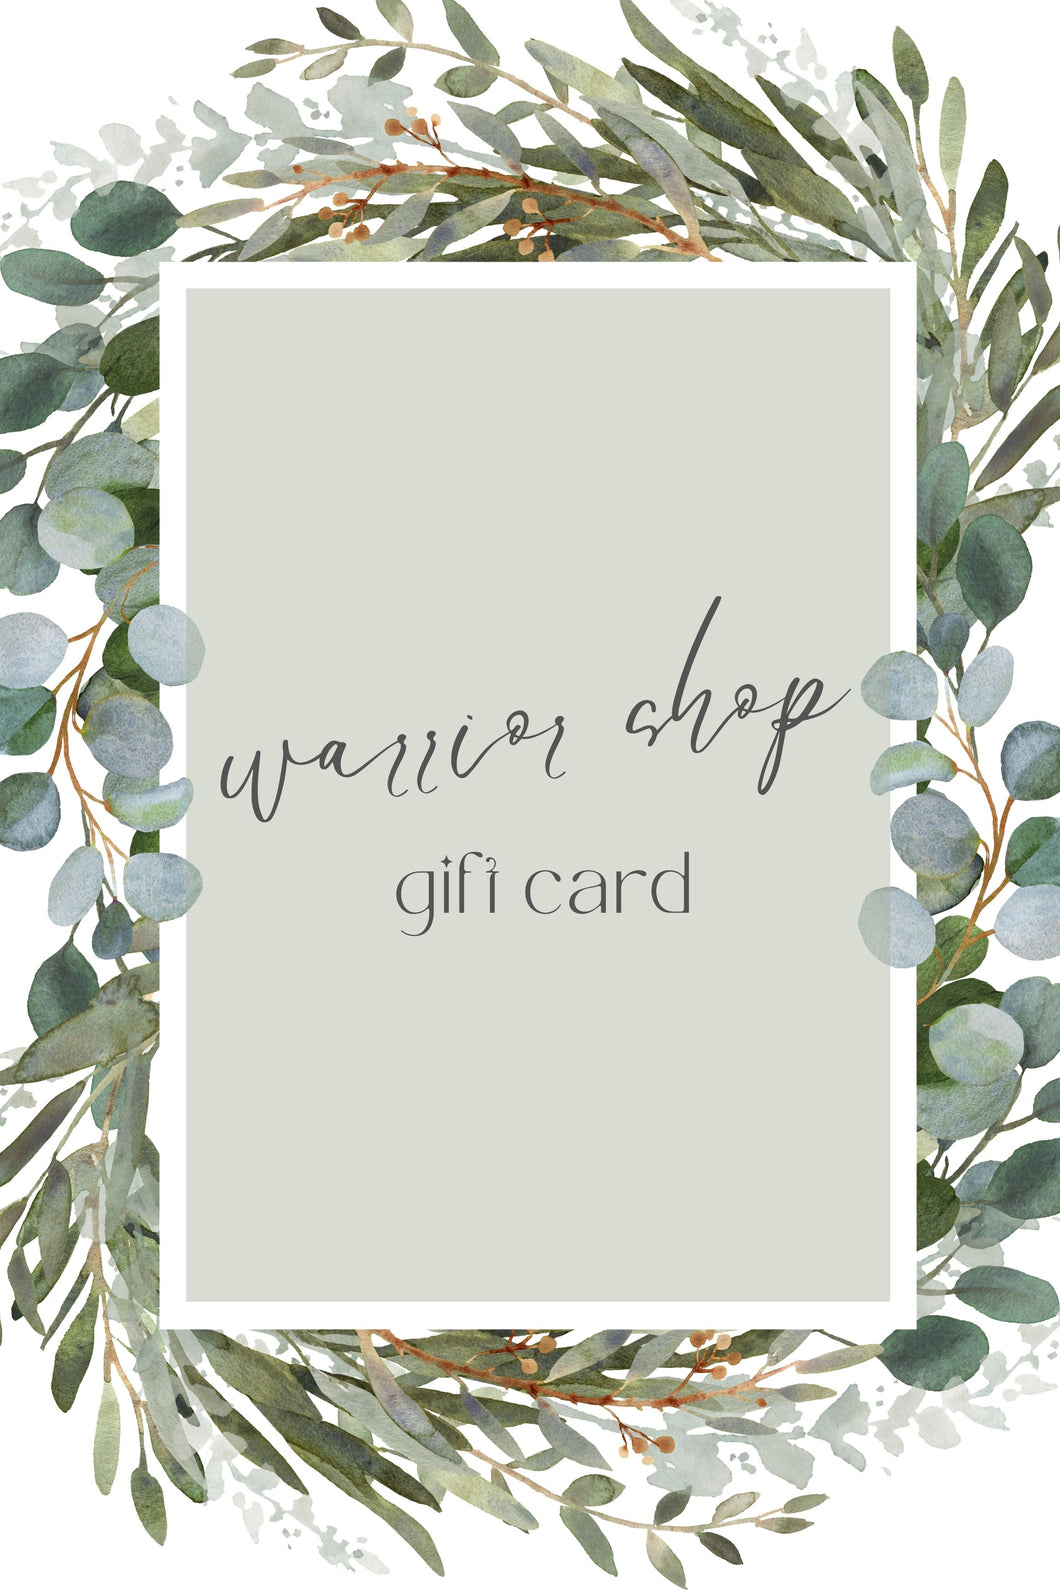 The Warrior Shop Gift Card